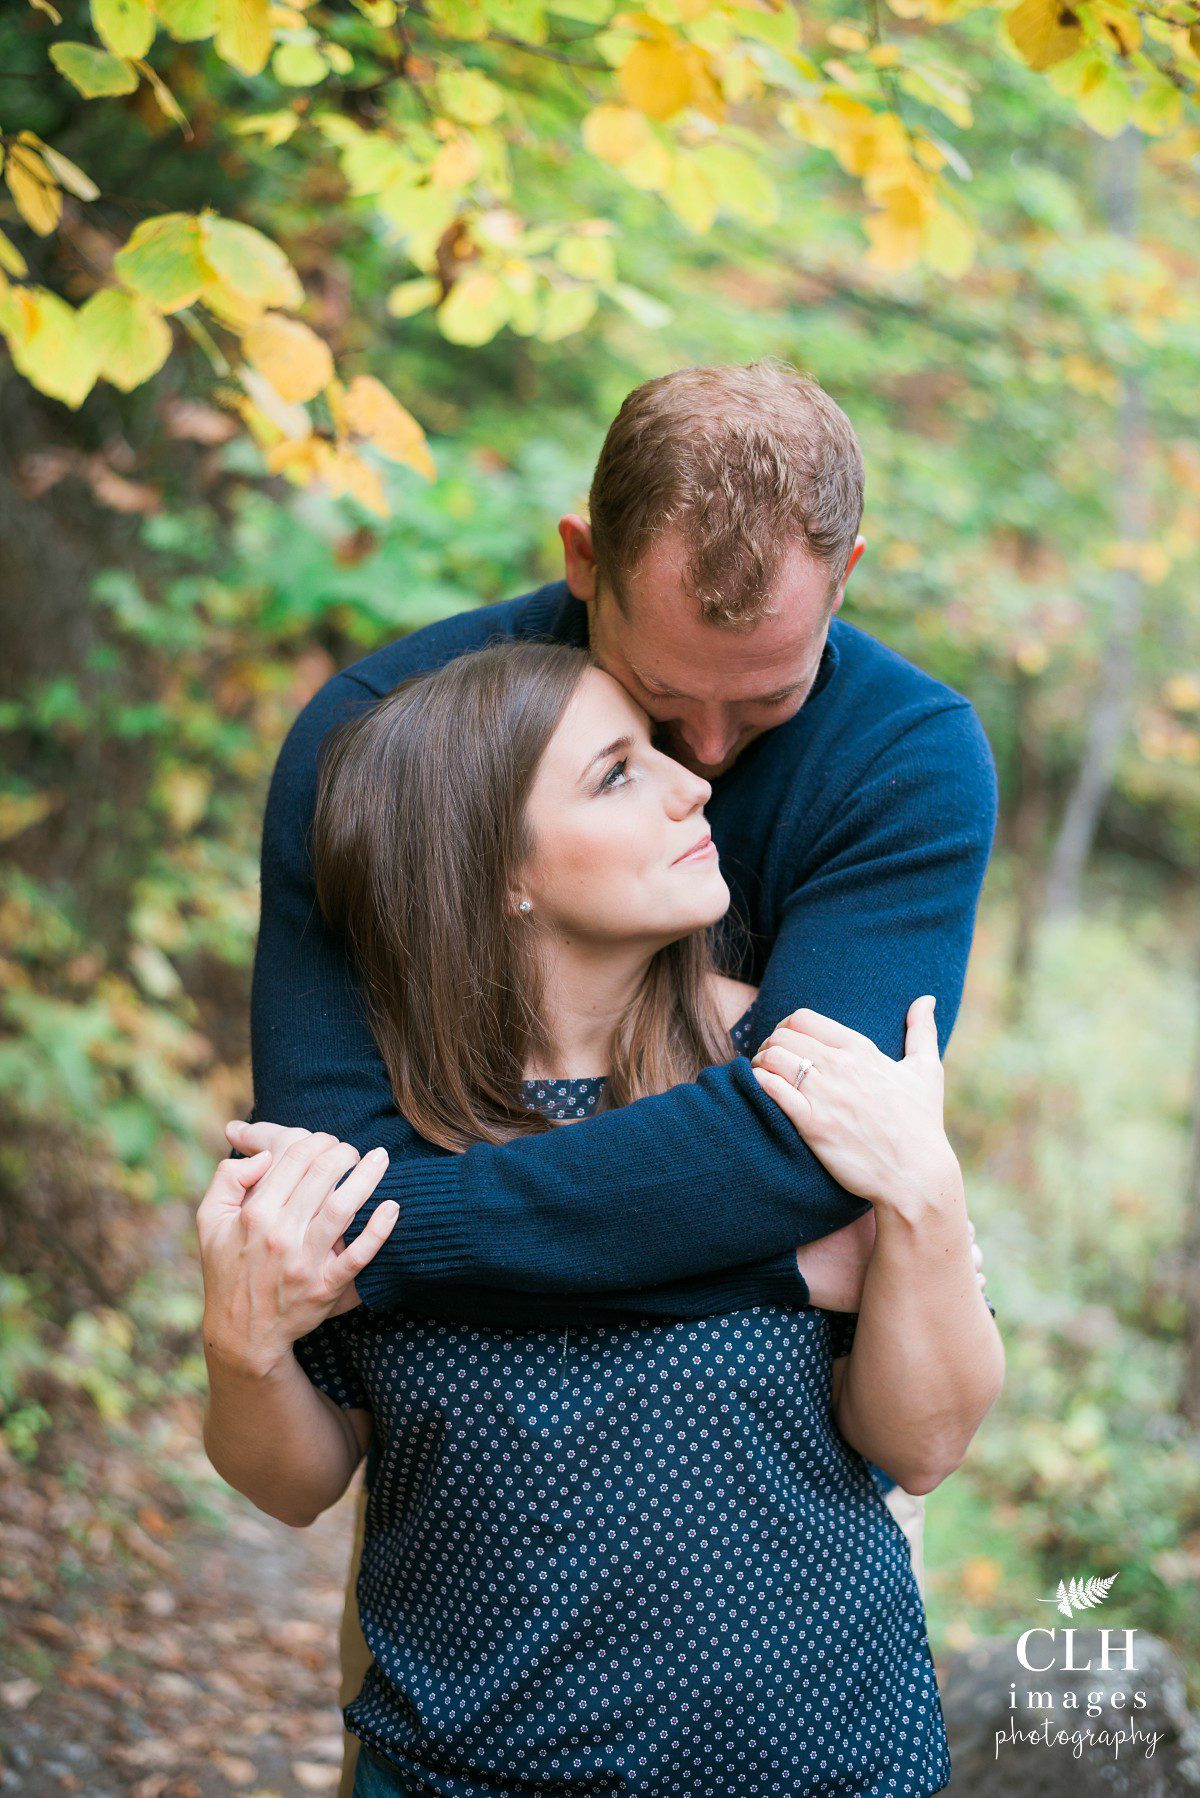 clh-images-photography-saratoga-engagement-photography-capital-district-engagement-photography-saratoga-state-park-photography-amy-and-matt-engagement-photos-16